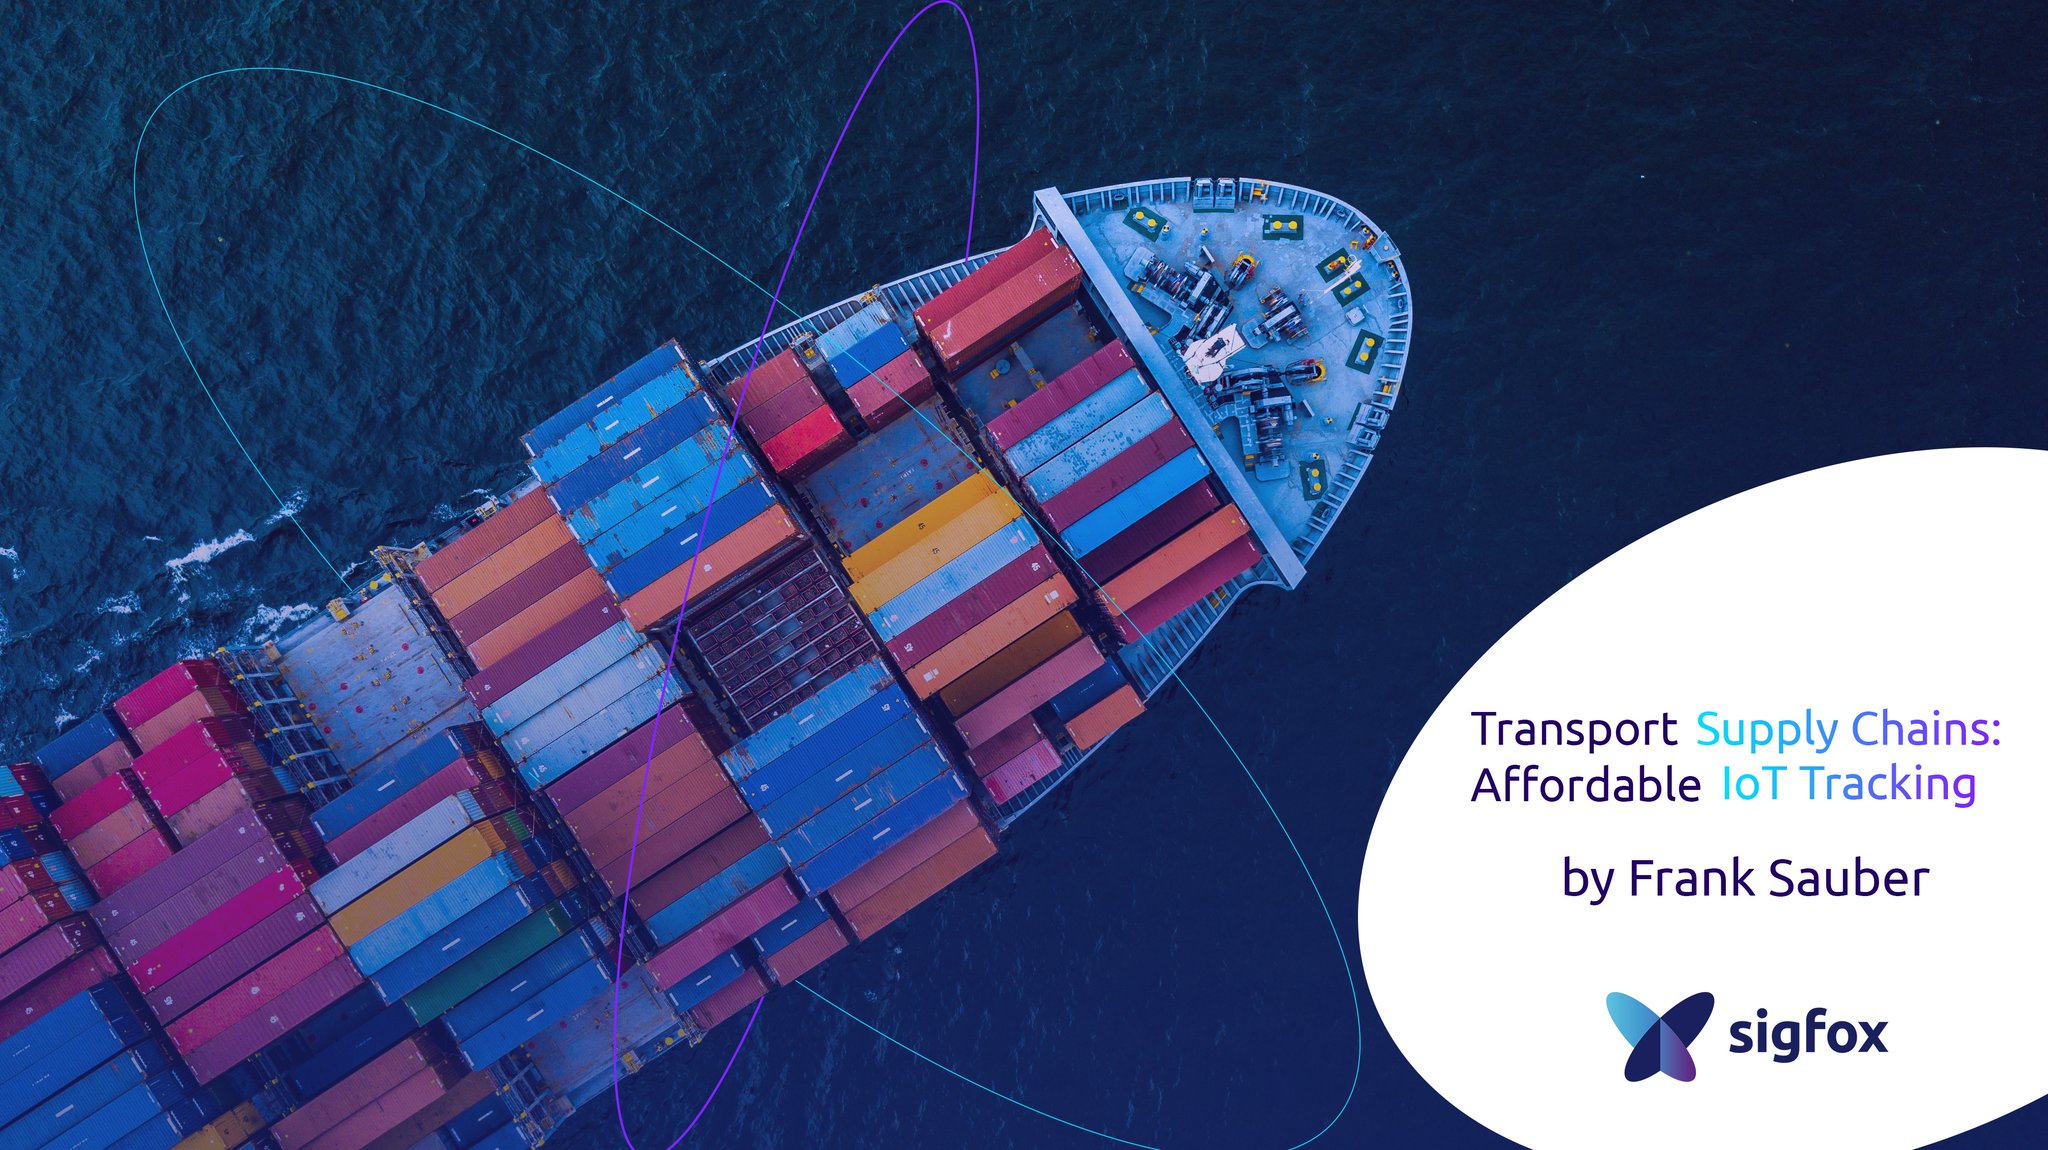 Transport Supply Chains: Affordable IoT Tracking